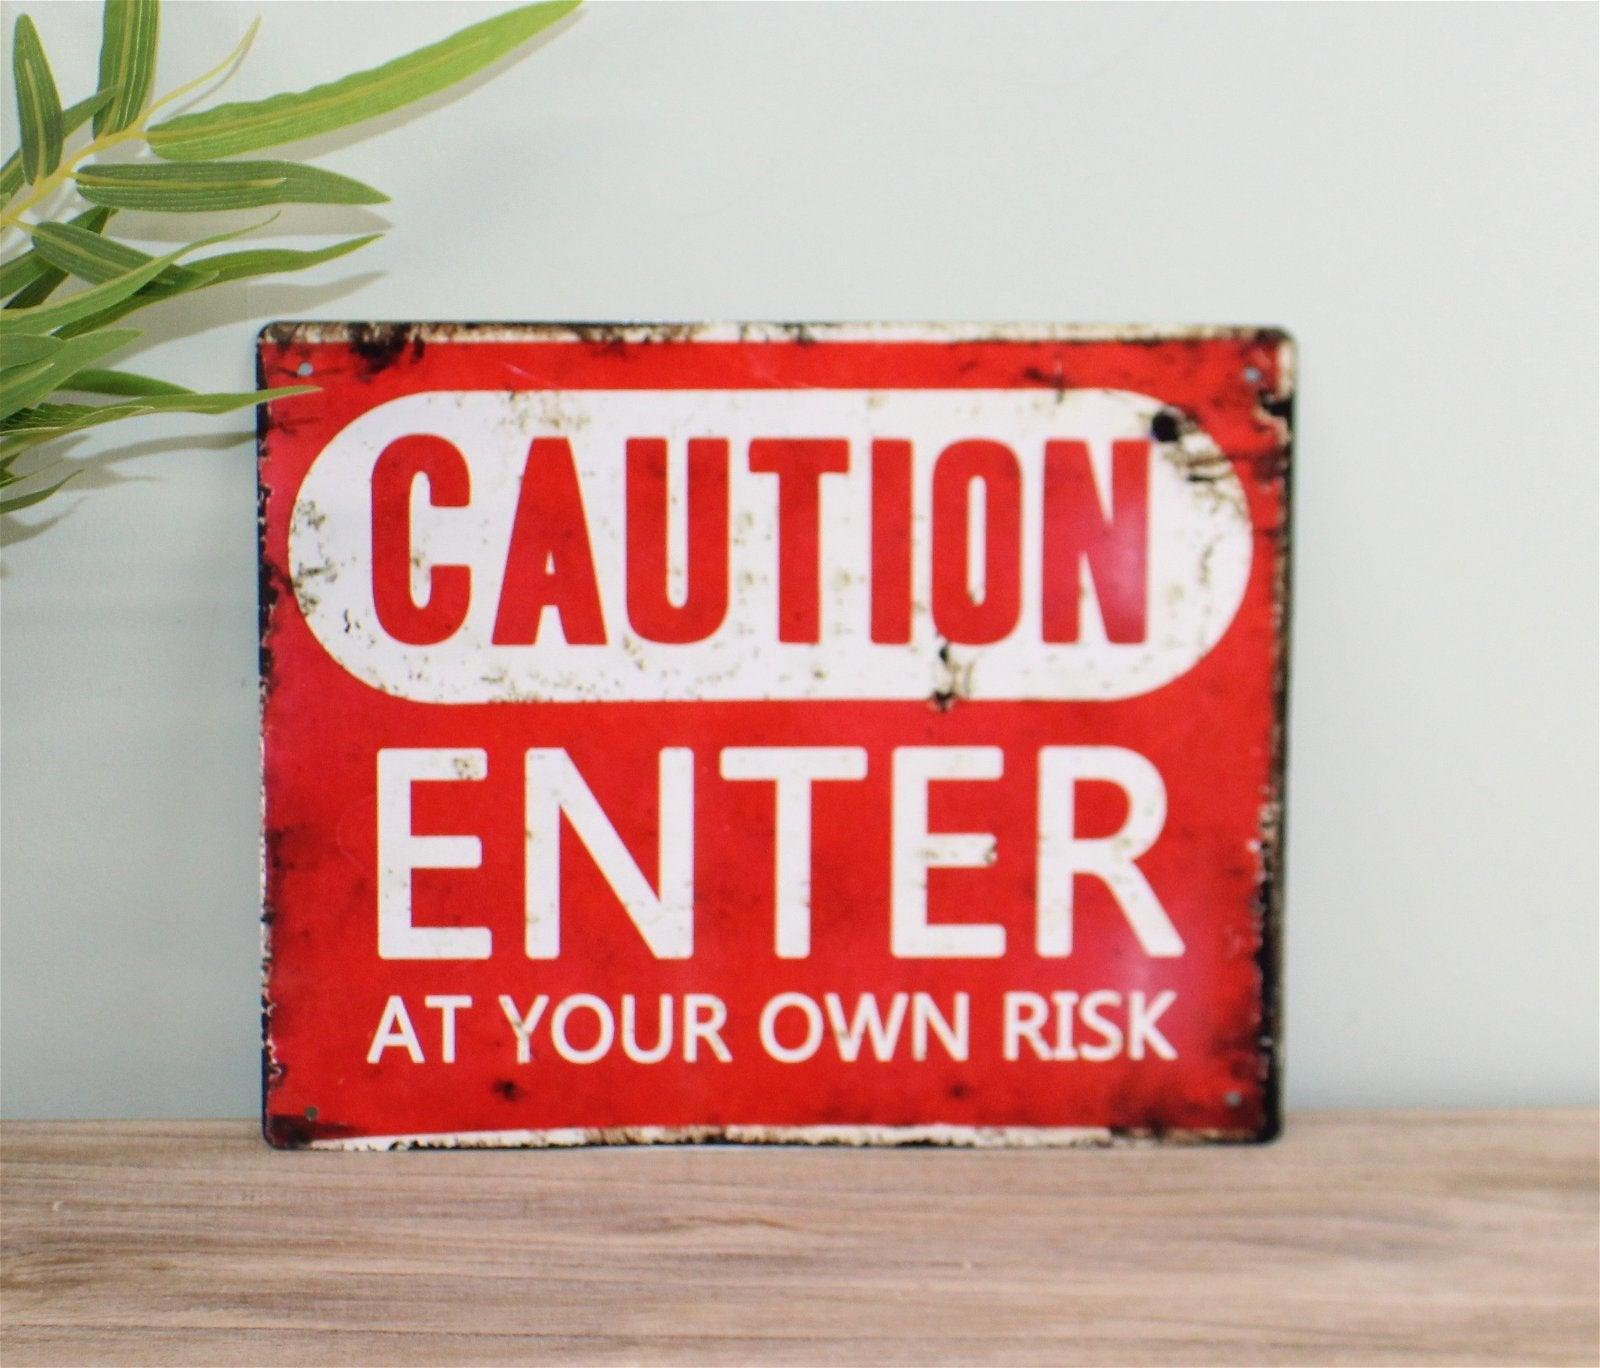 Vintage Metal Sign - Caution Enter At Your Own Risk - £18.99 - Signs & Rules 